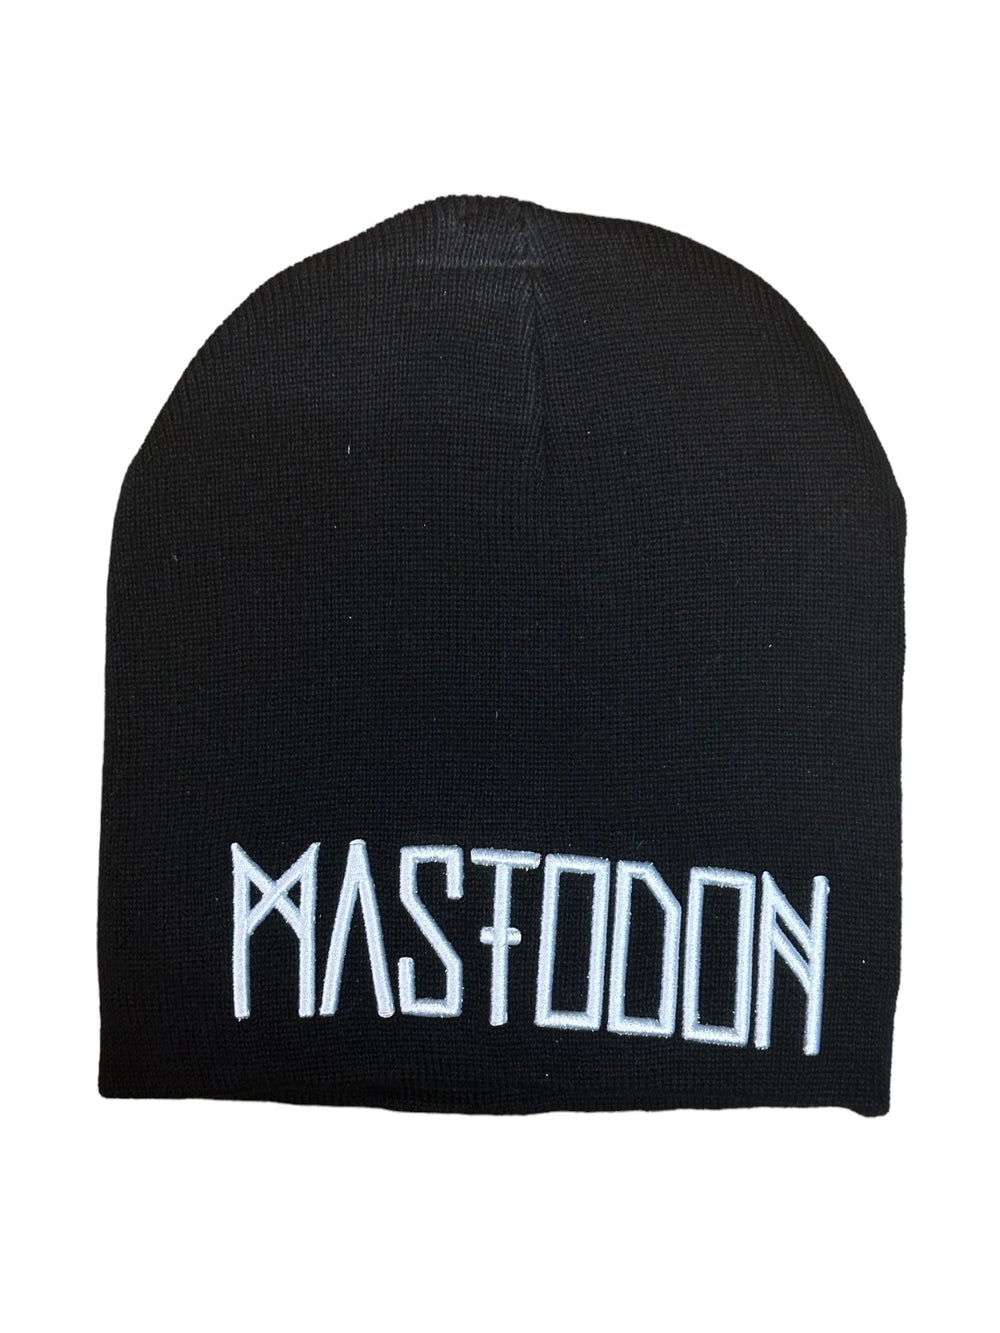 Mastodon - Logo Official Beanie Hat One Size Fits All Brand NEW